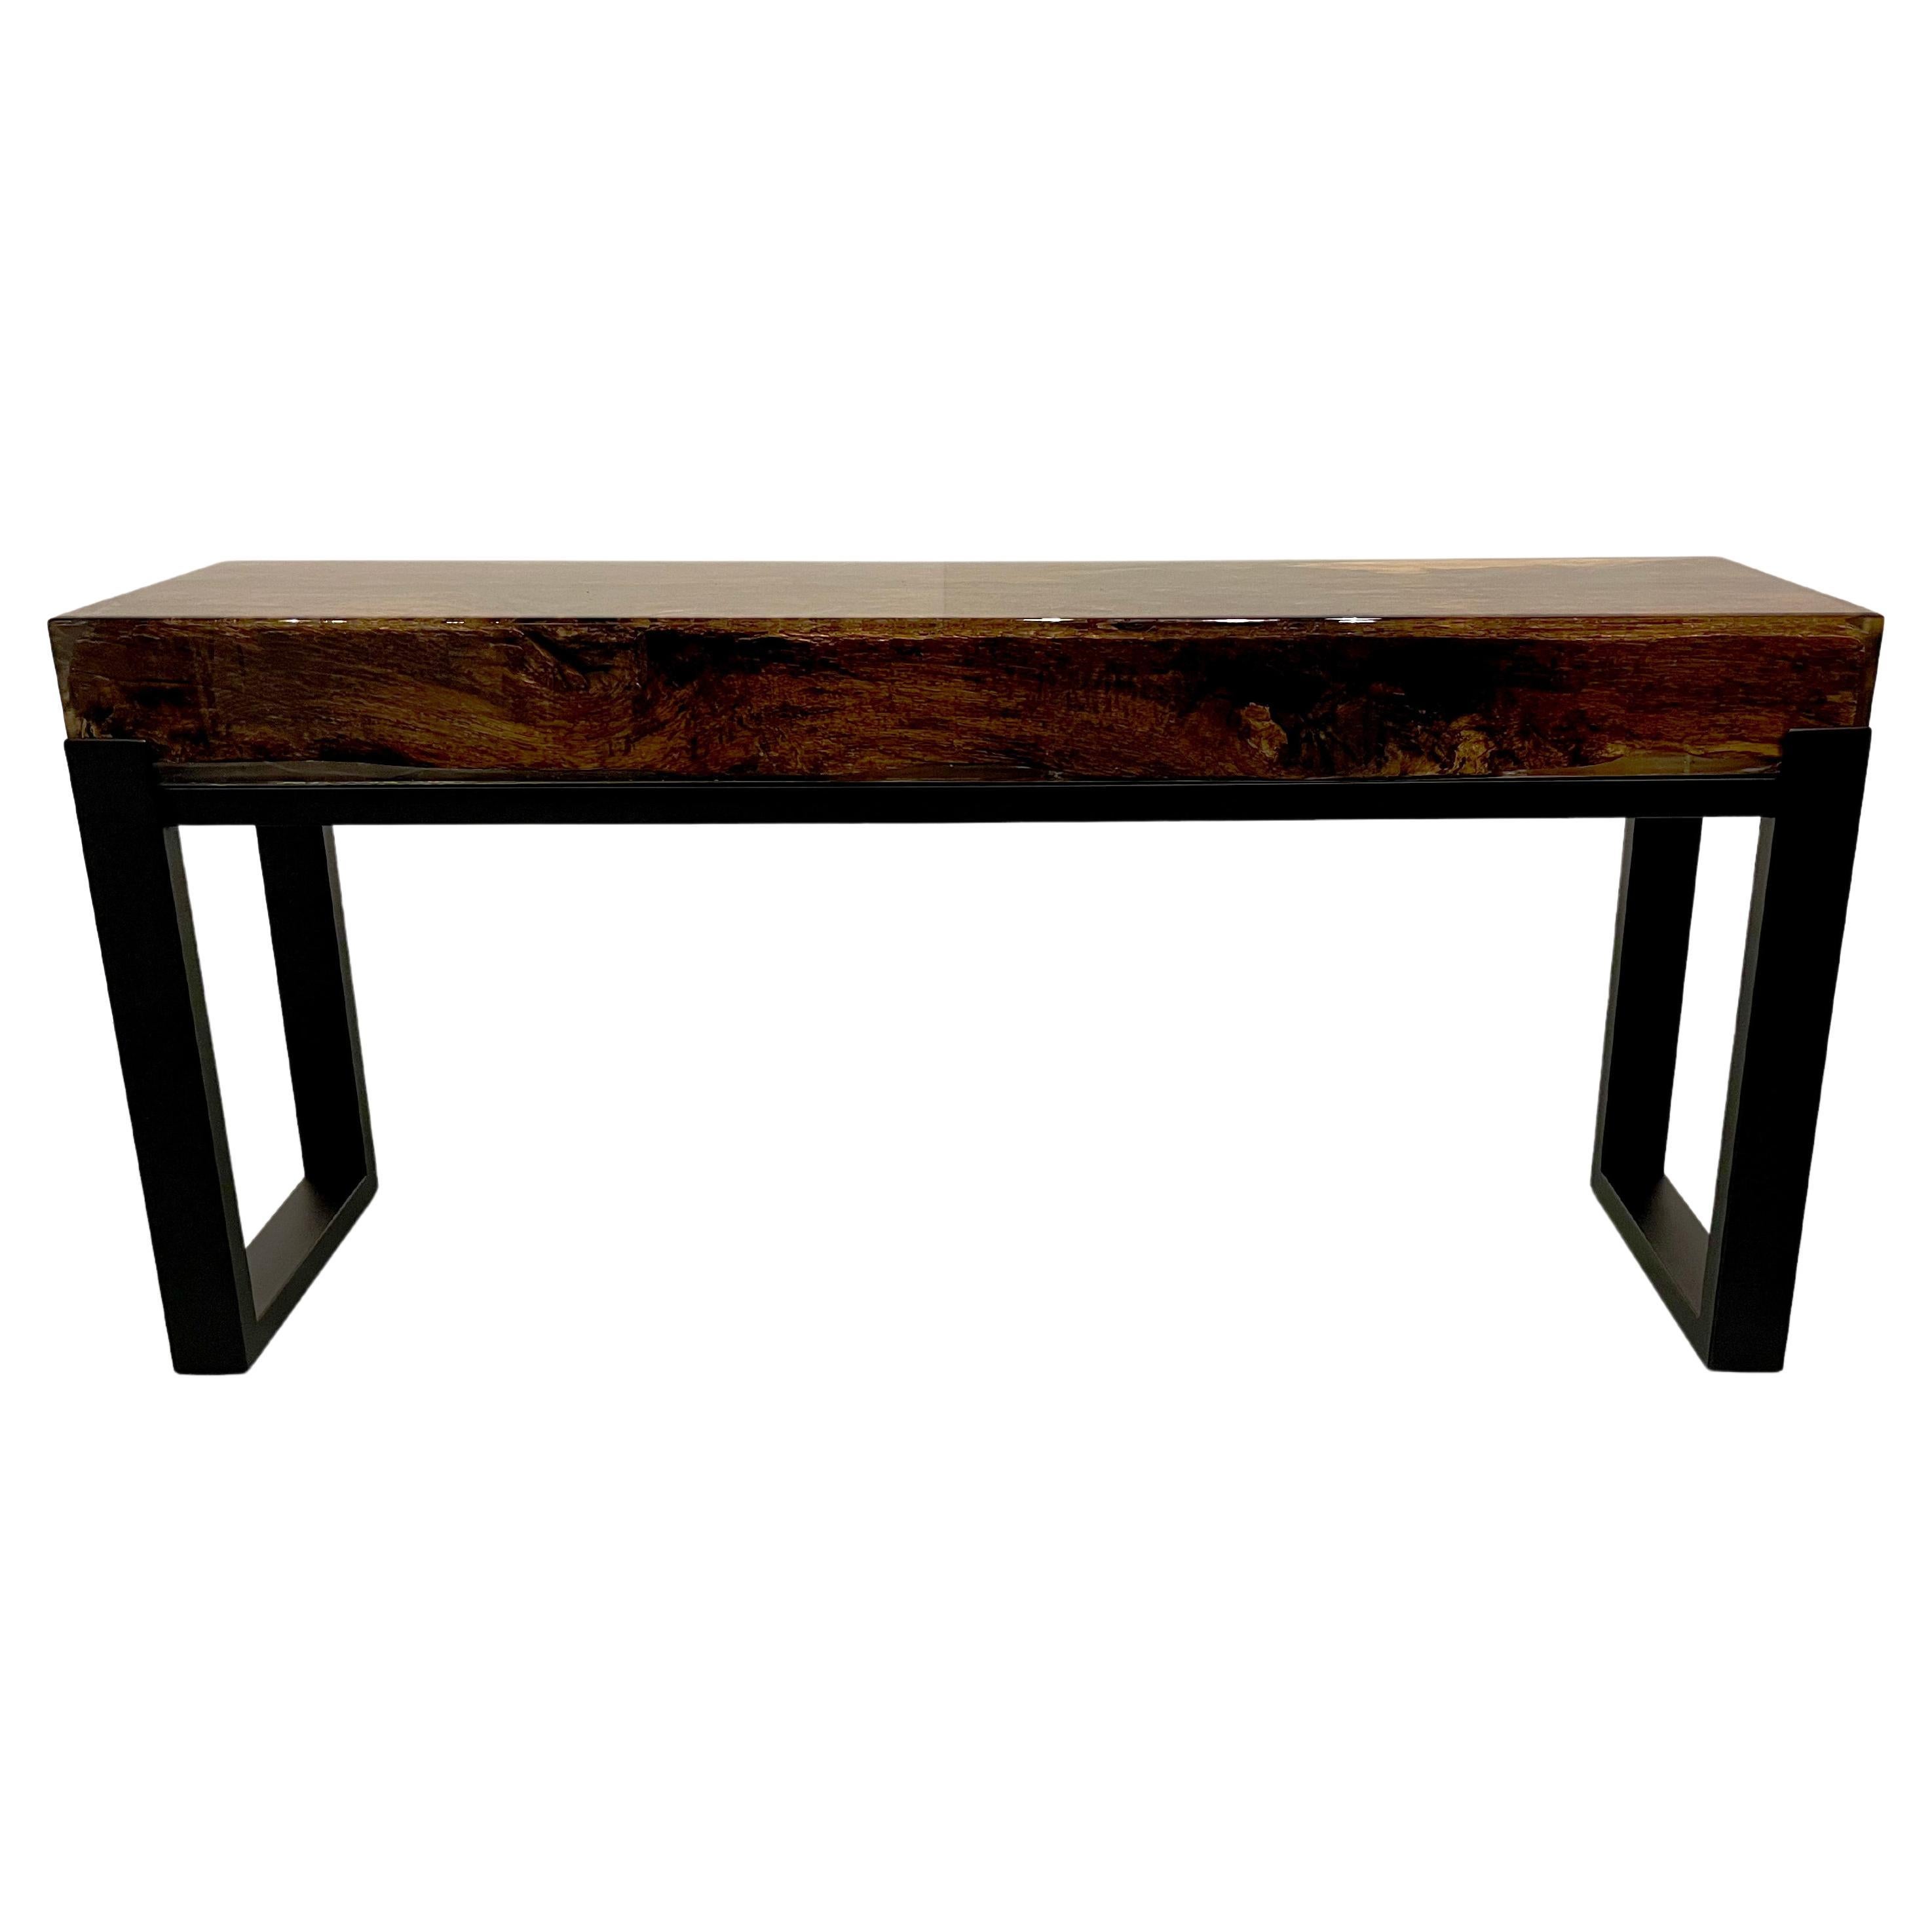 Side Table Made of Oak Wooden Beam, Cast in Epoxy, on a Steel Frame